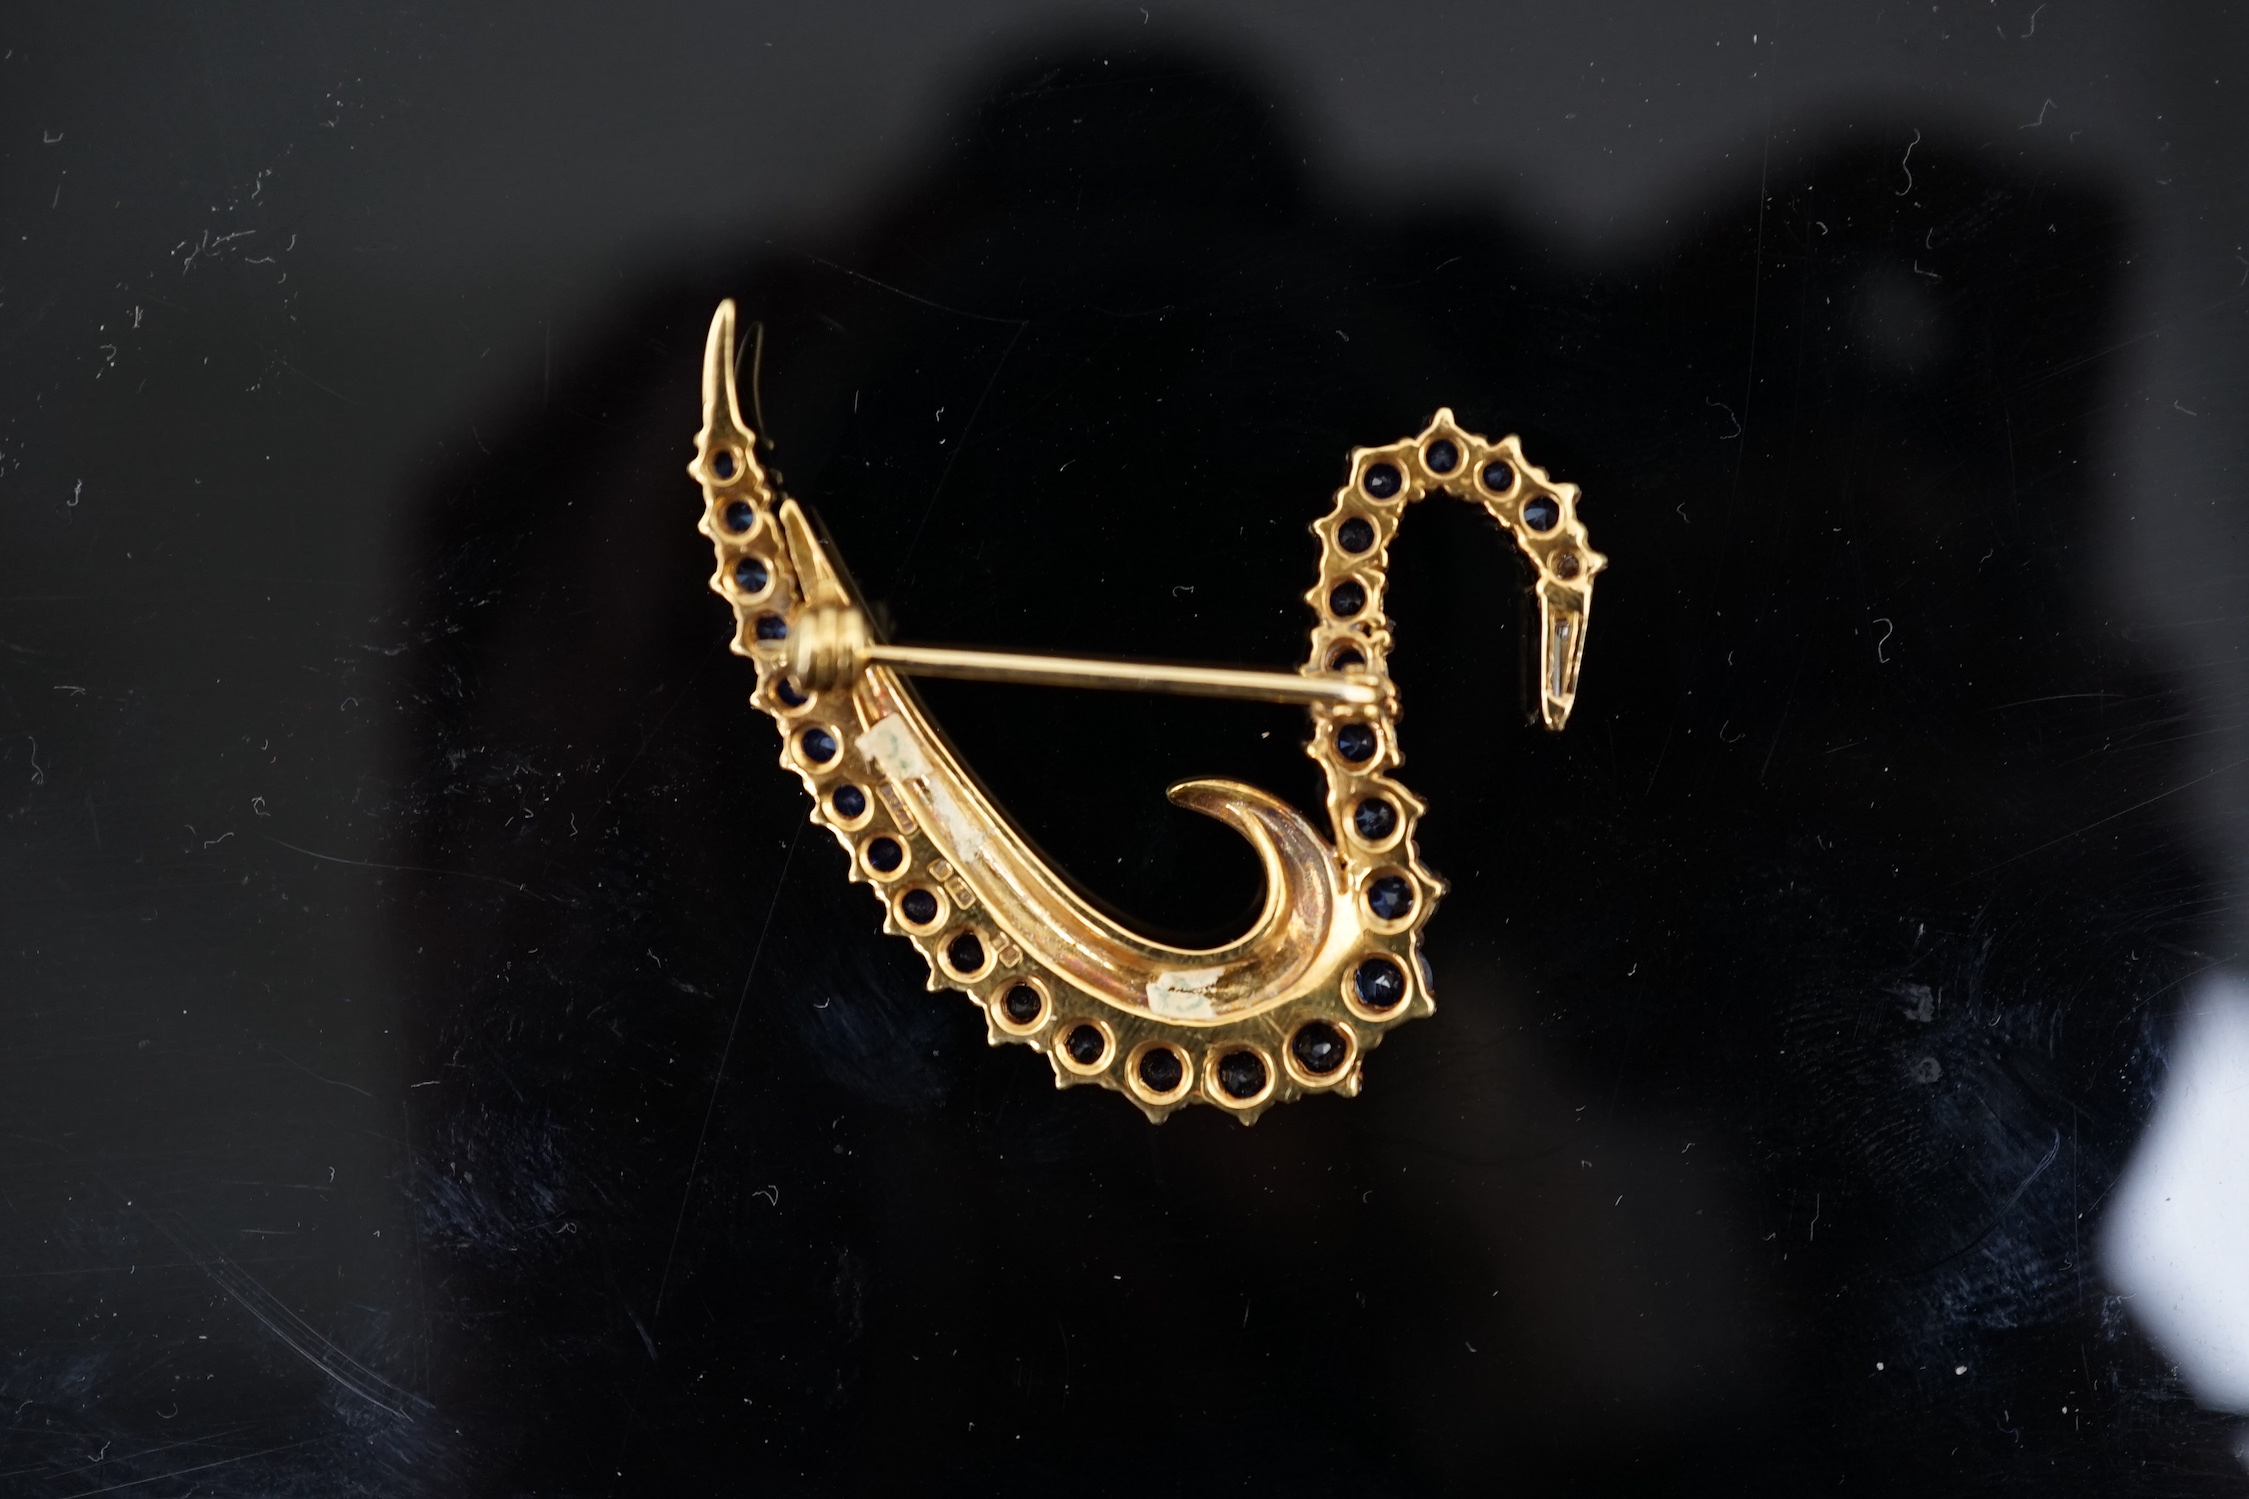 A 1990's 18ct gold, sapphire and diamond cluster brooch, modelled as a swan